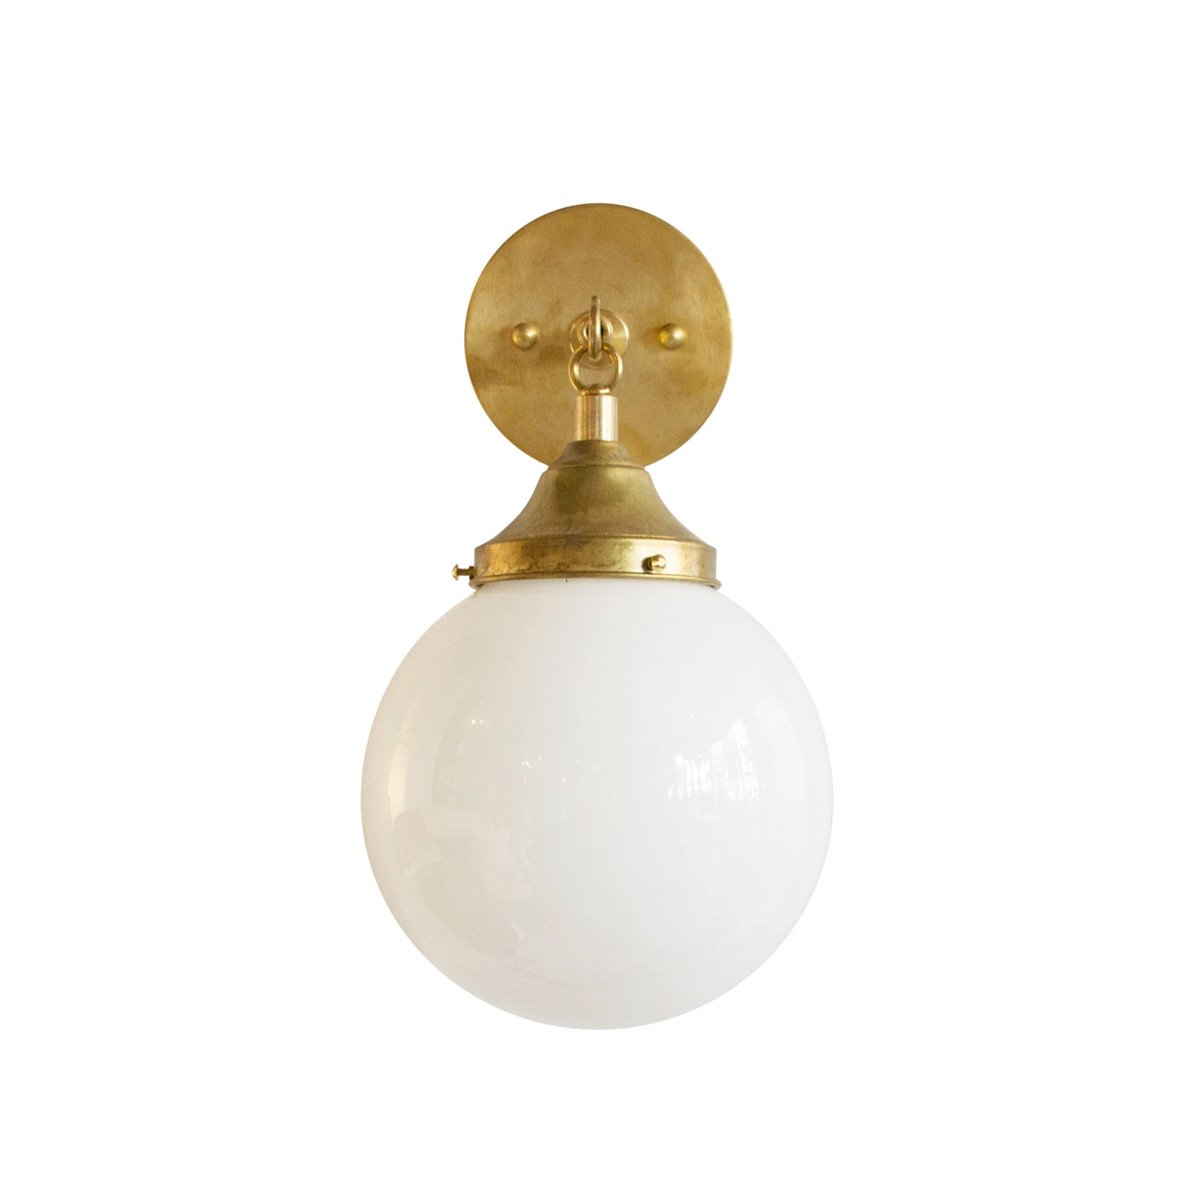 Vintage Inspired SCICCOSO BEBE Brass Wall Sconce Lamp Light